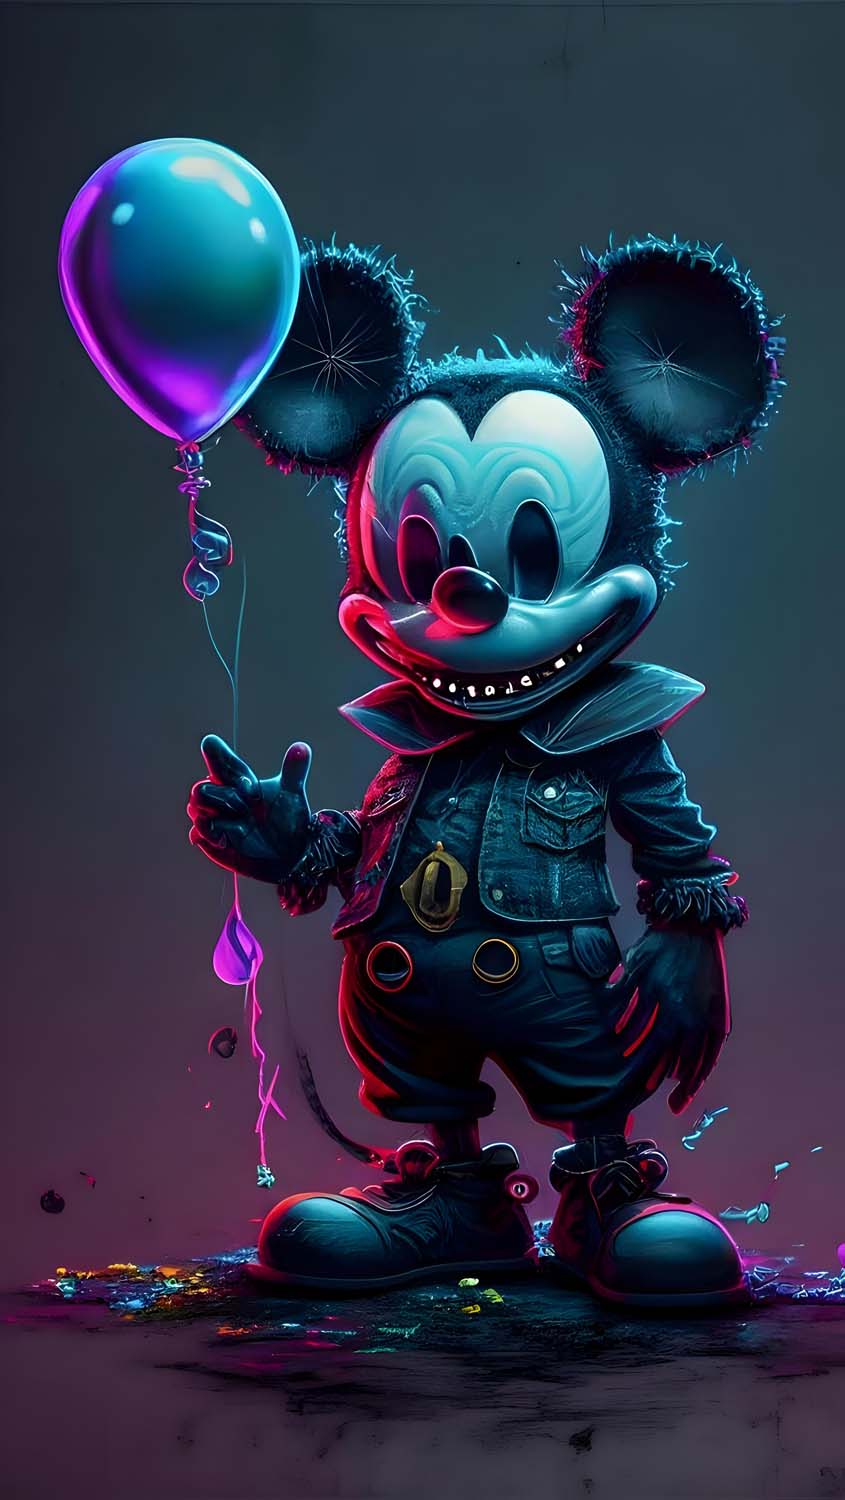 Cool Micky Mouse Wallpaper 4k